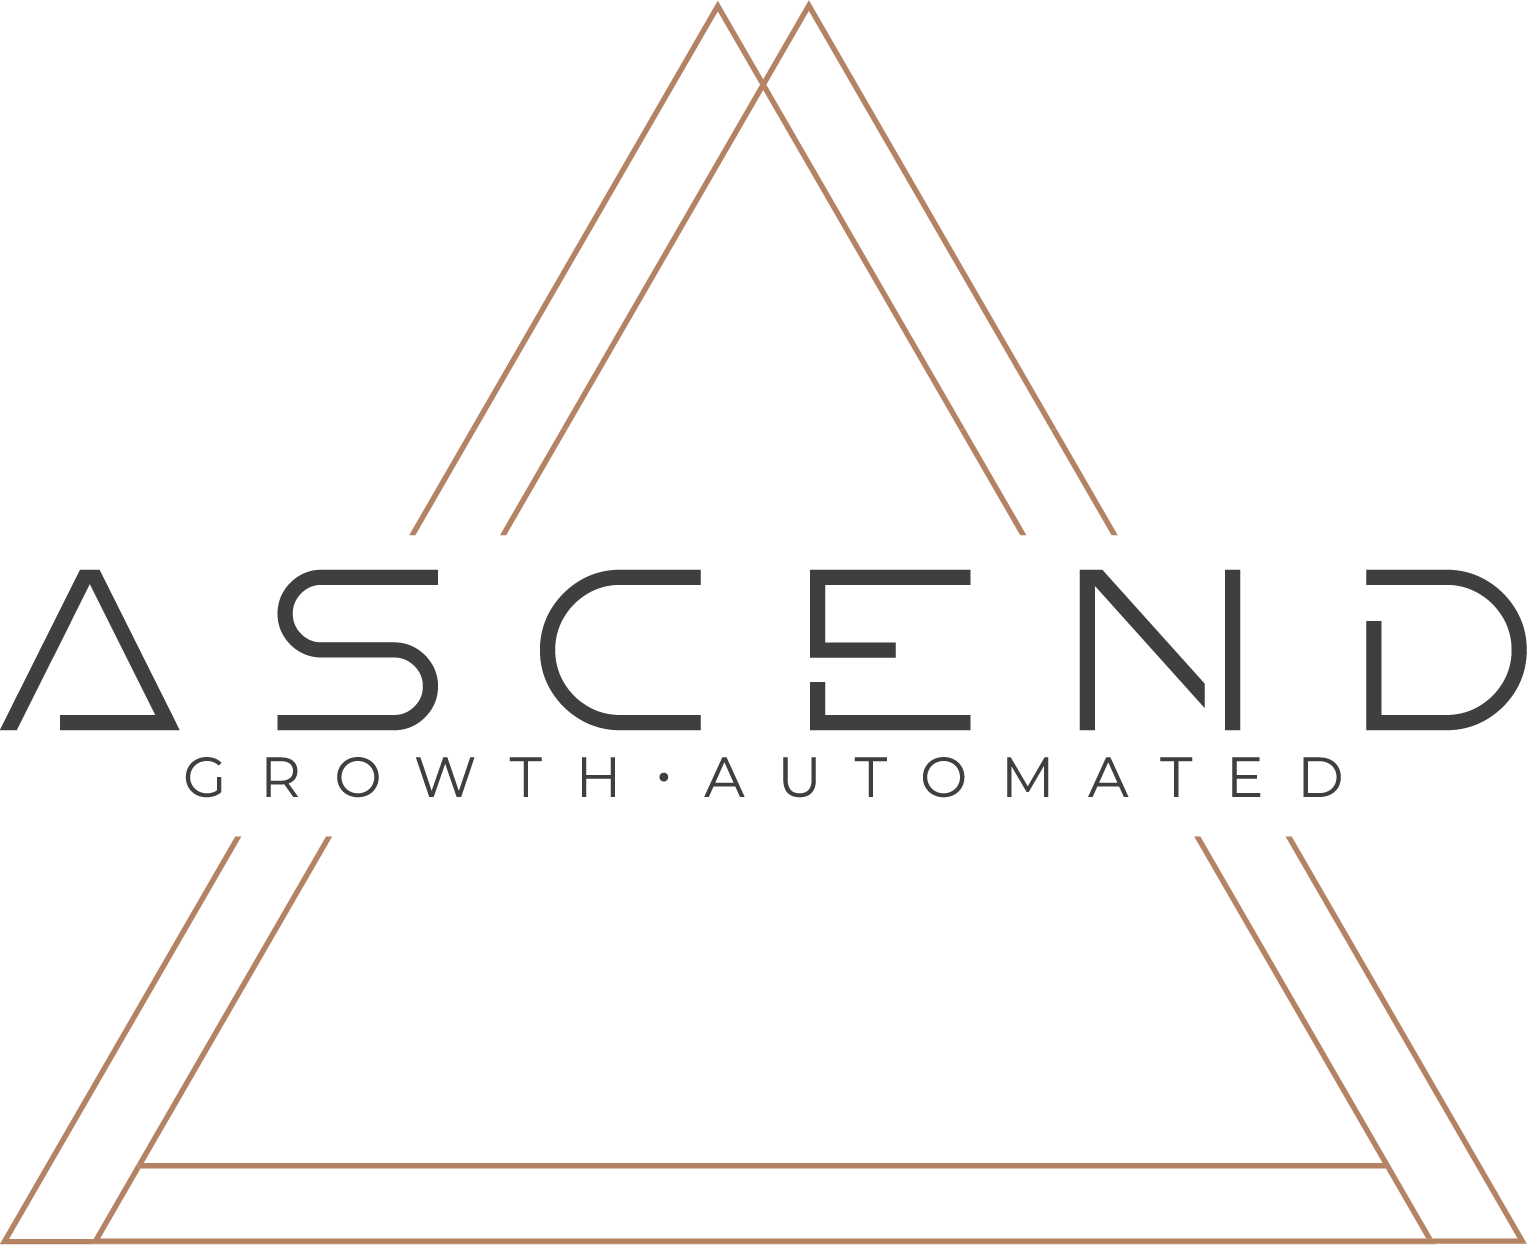 Ascend Ecom, Friday, March 18, 2022, Press release picture